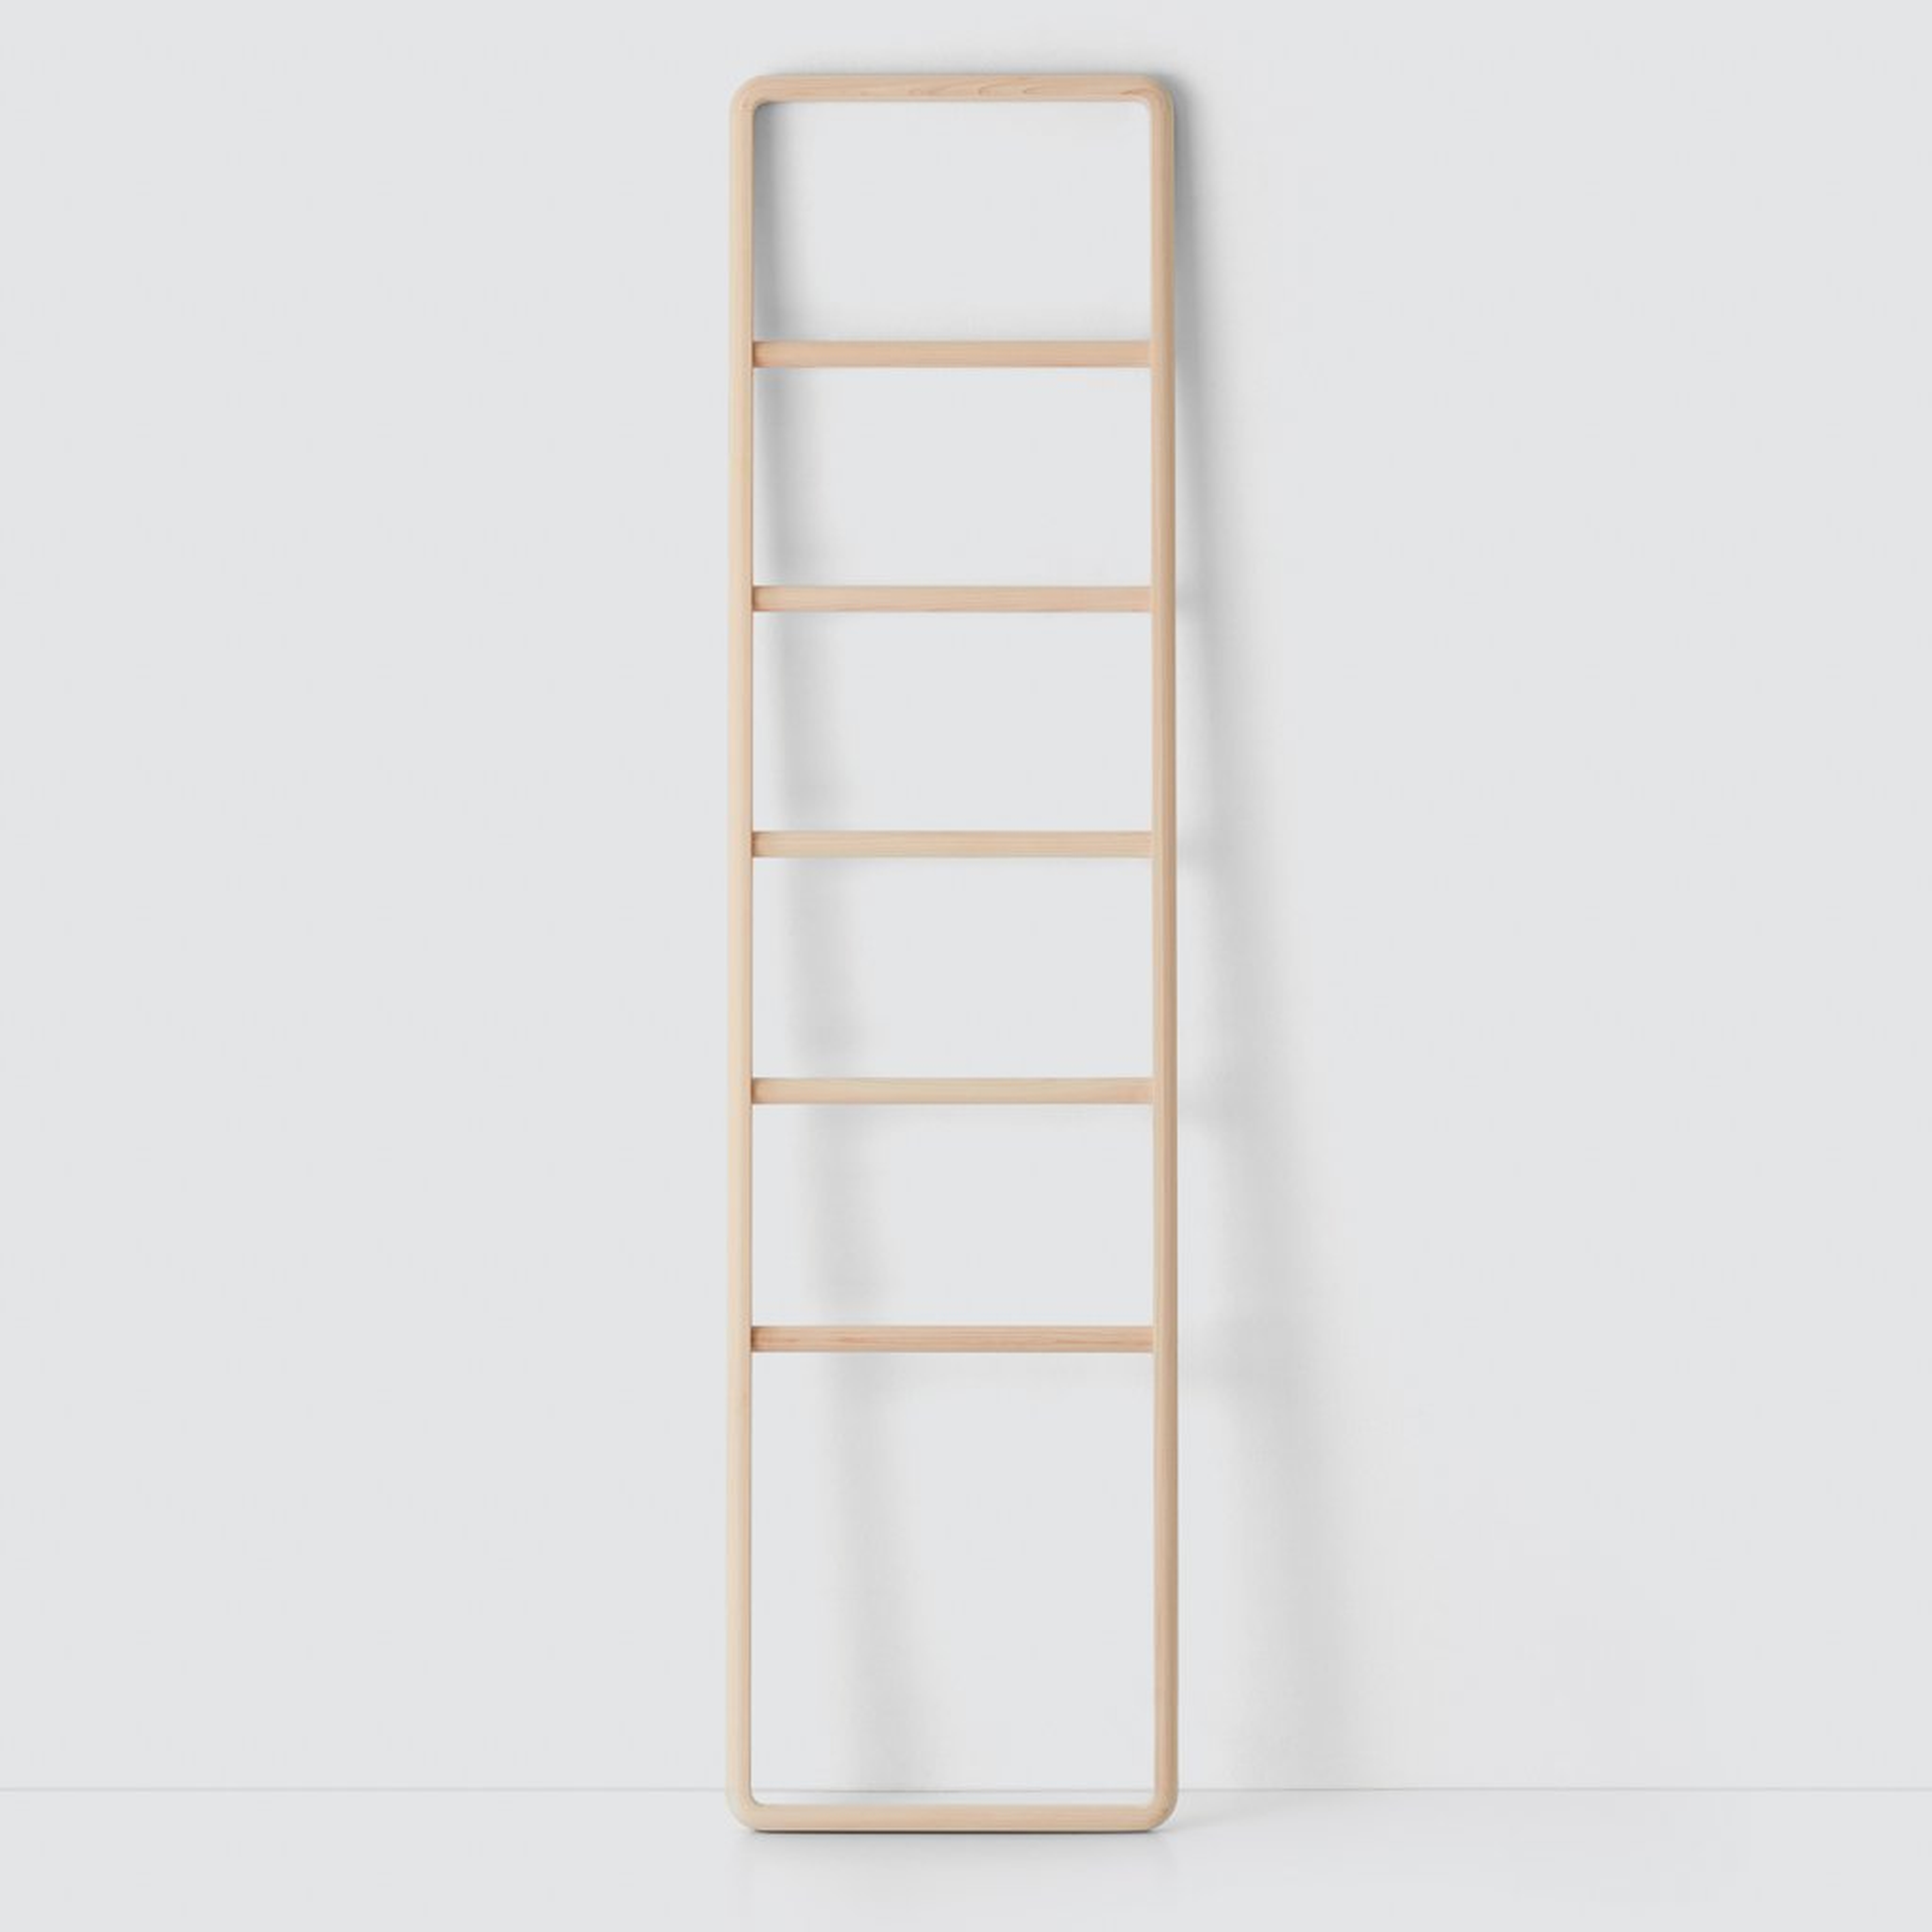 Hinoki Wood Ladder By The Citizenry - The Citizenry